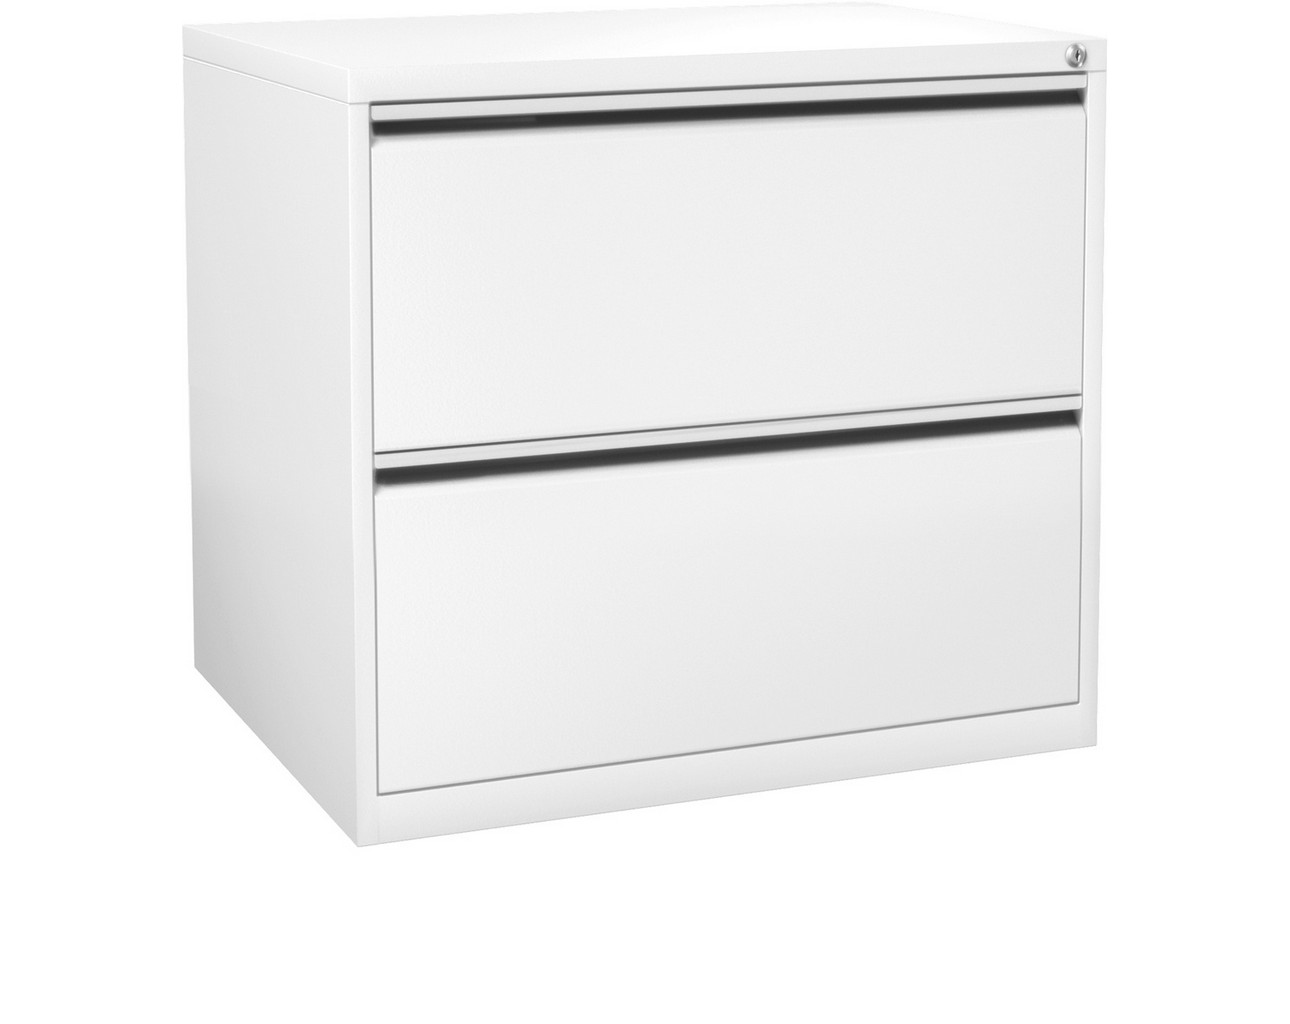 Steelwise Lateral Filing Cabinet – 2 Drawer in White